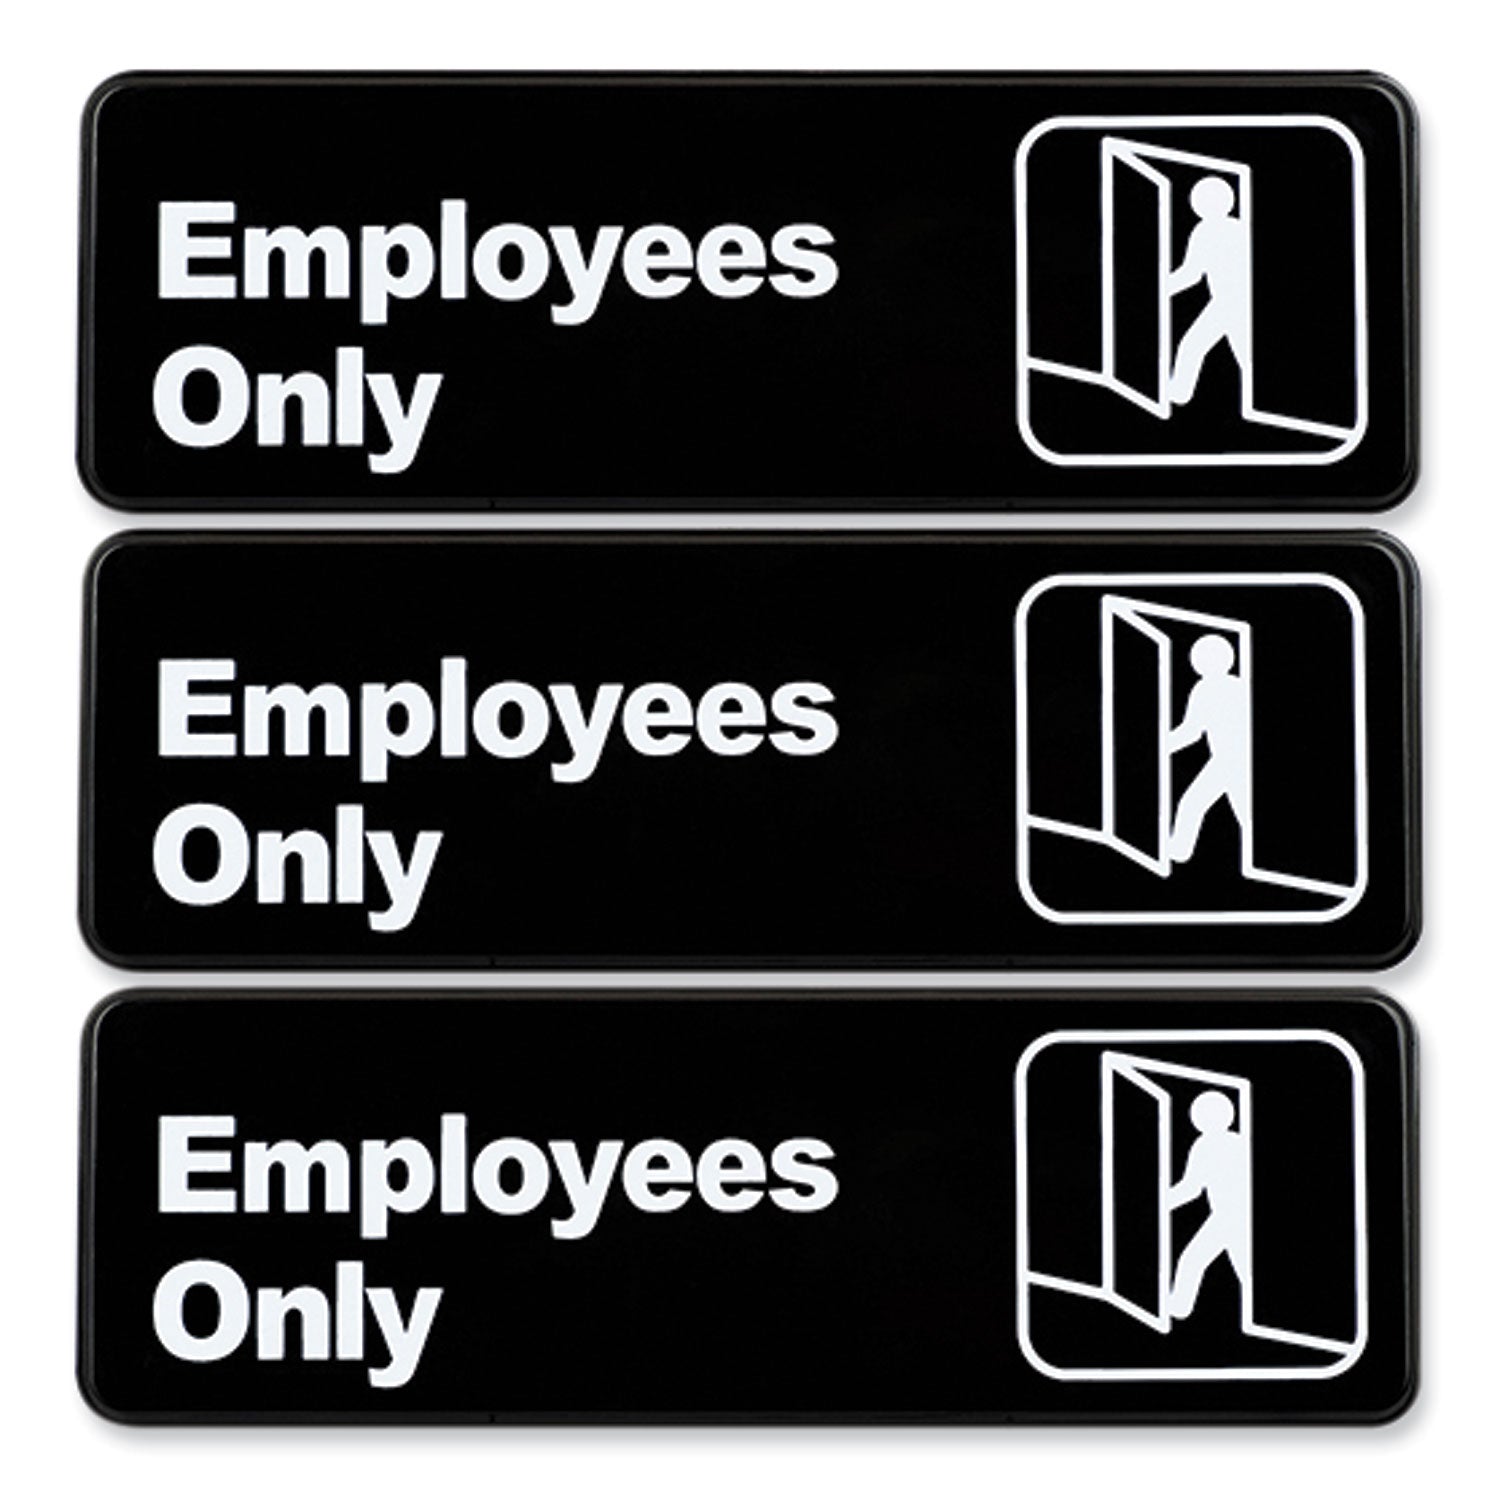 employees-only-indoor-outdoor-wall-sign-9-x-3-black-face-white-graphics-3-pack_exohd0050s - 1